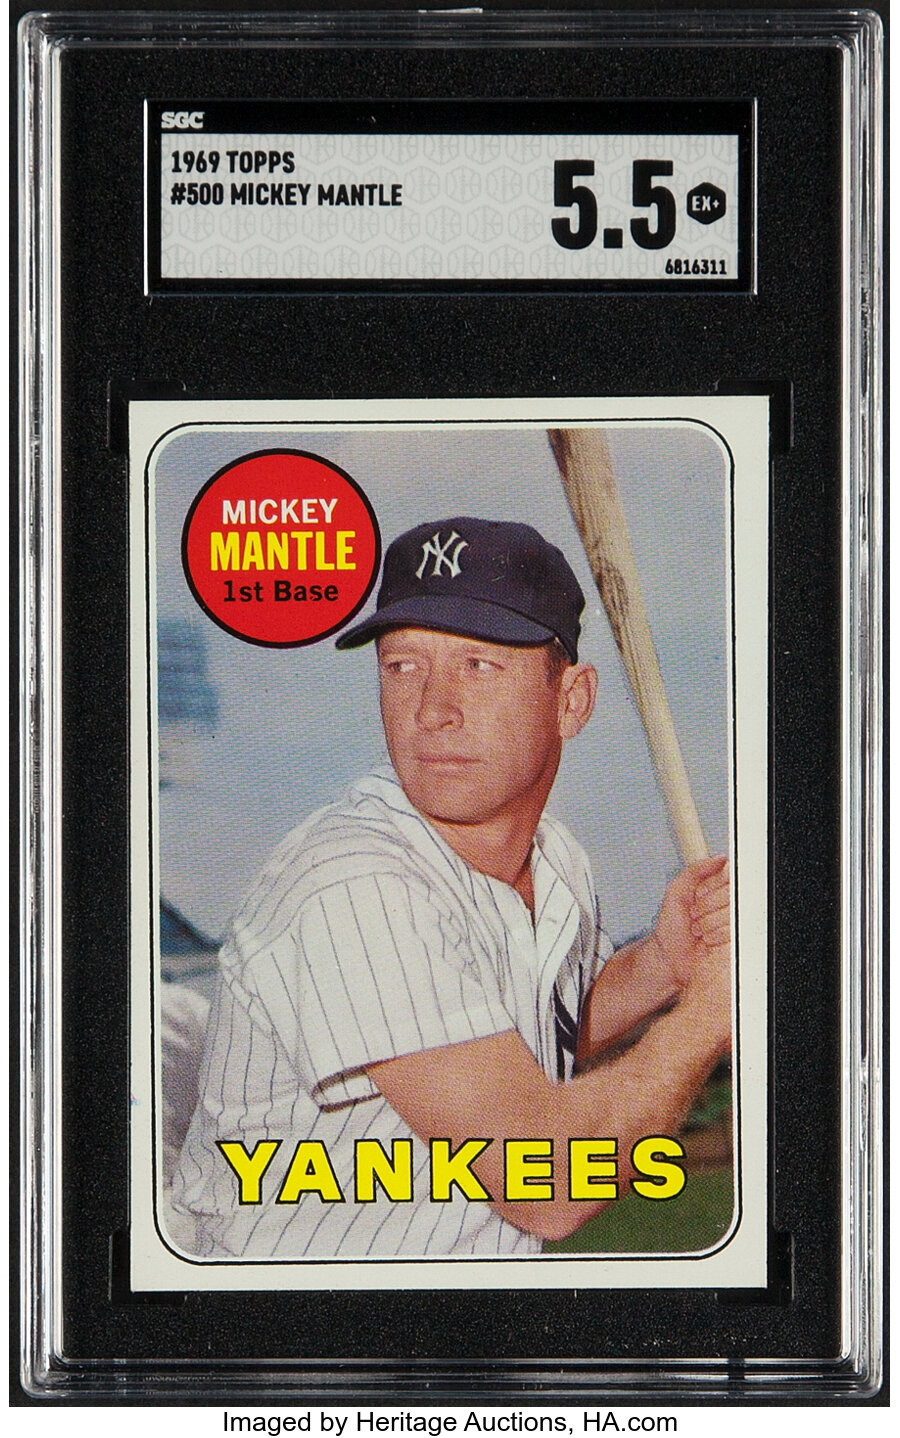 1969 Topps Mickey Mantle (Last Name In Yellow) #500 SGC EX+ 5.5